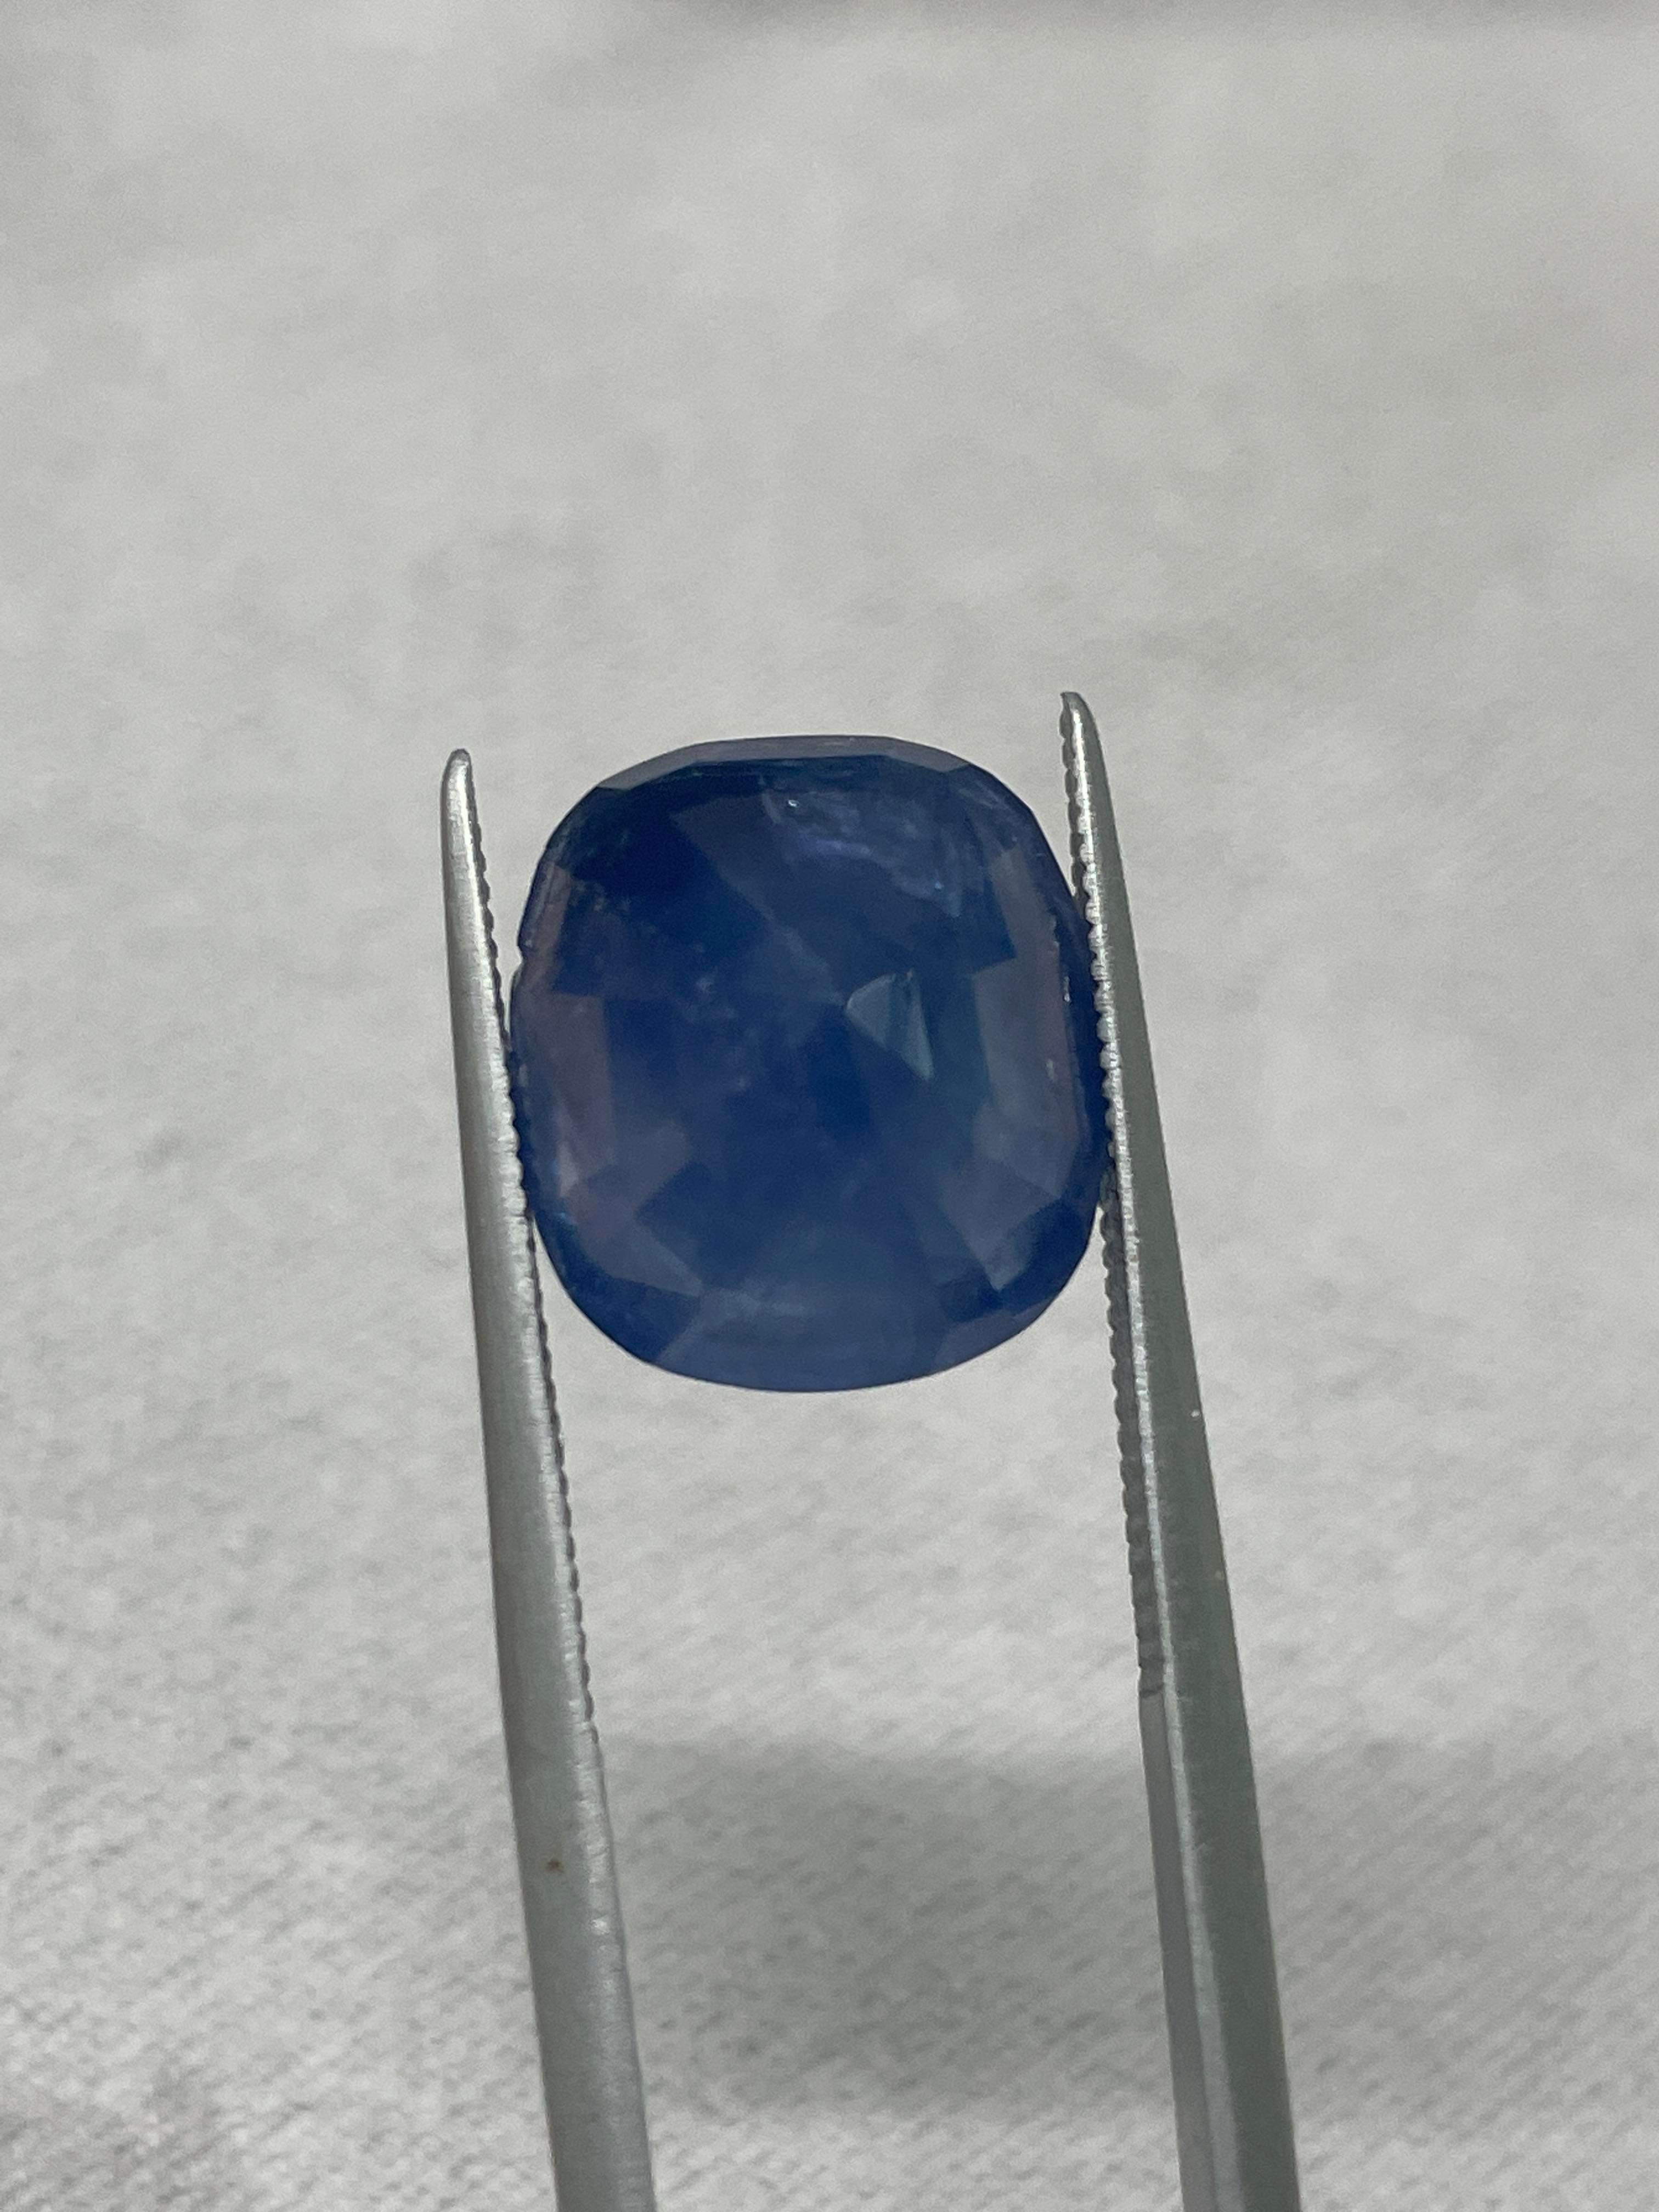 Women's or Men's GRS Certified 12.68 Carat Blue Sapphire Untreated Loose Gem For Sale